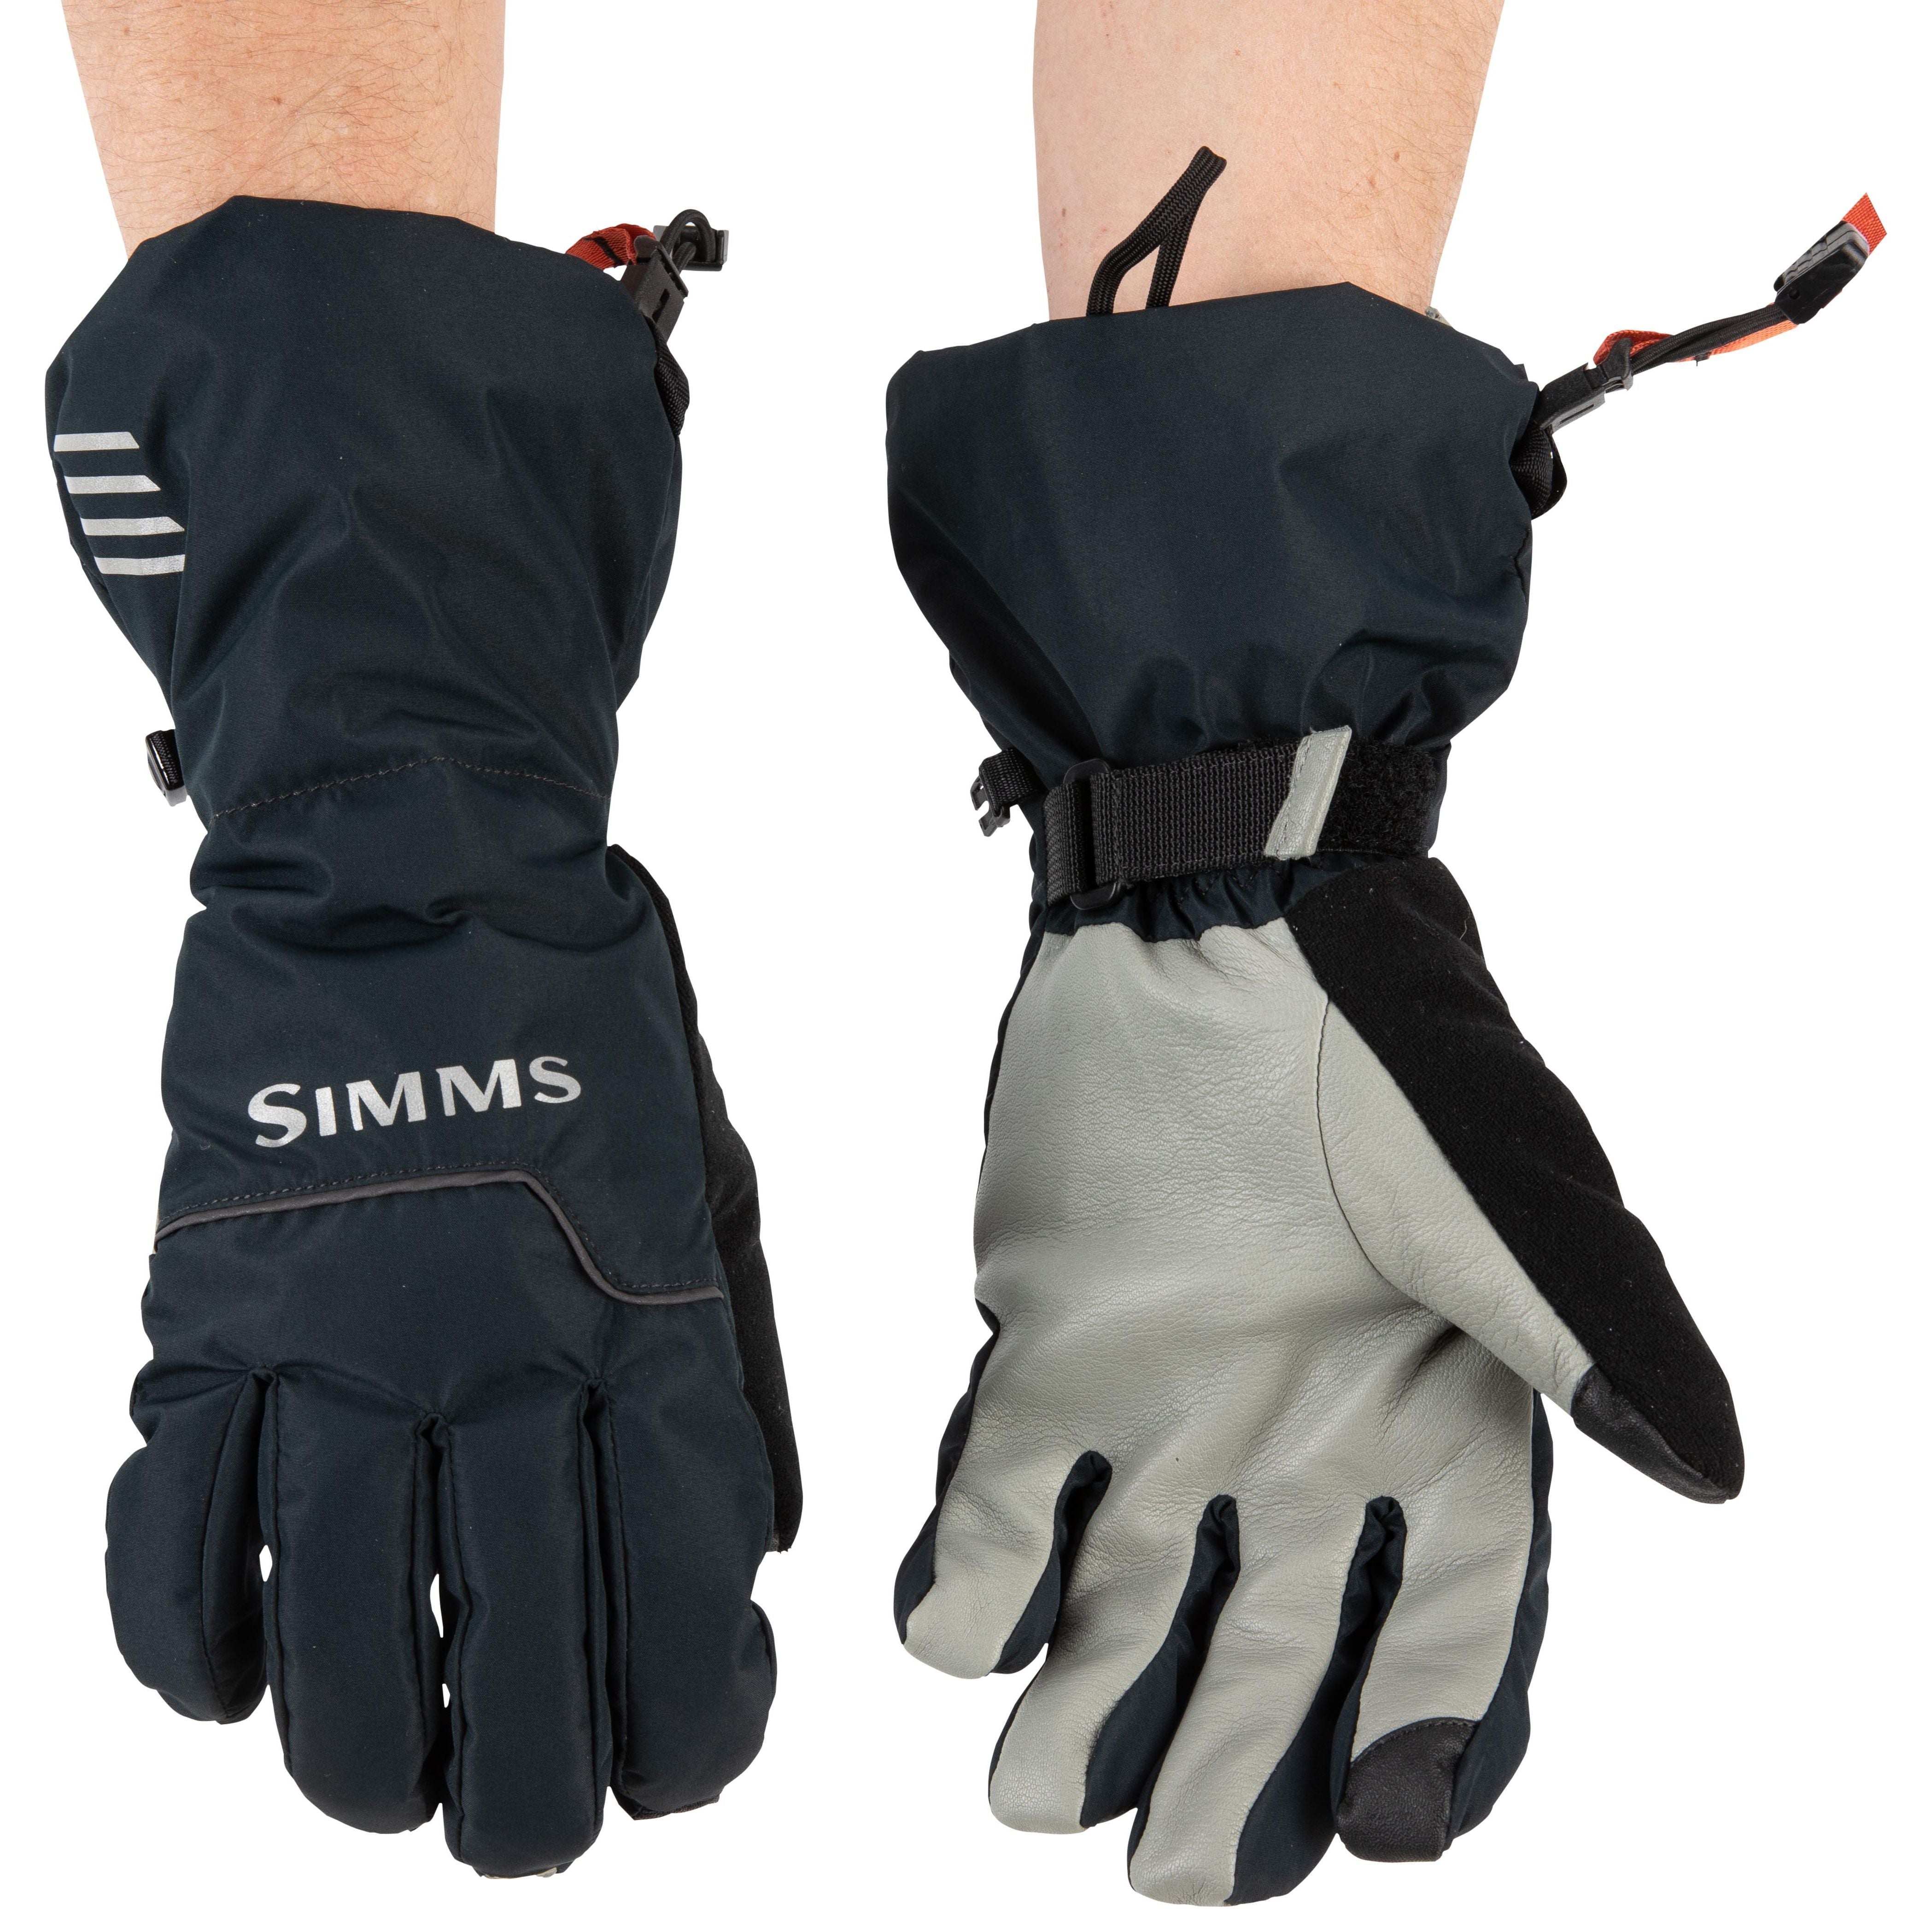 Simms Challenger Insulated Glove Black Image 1